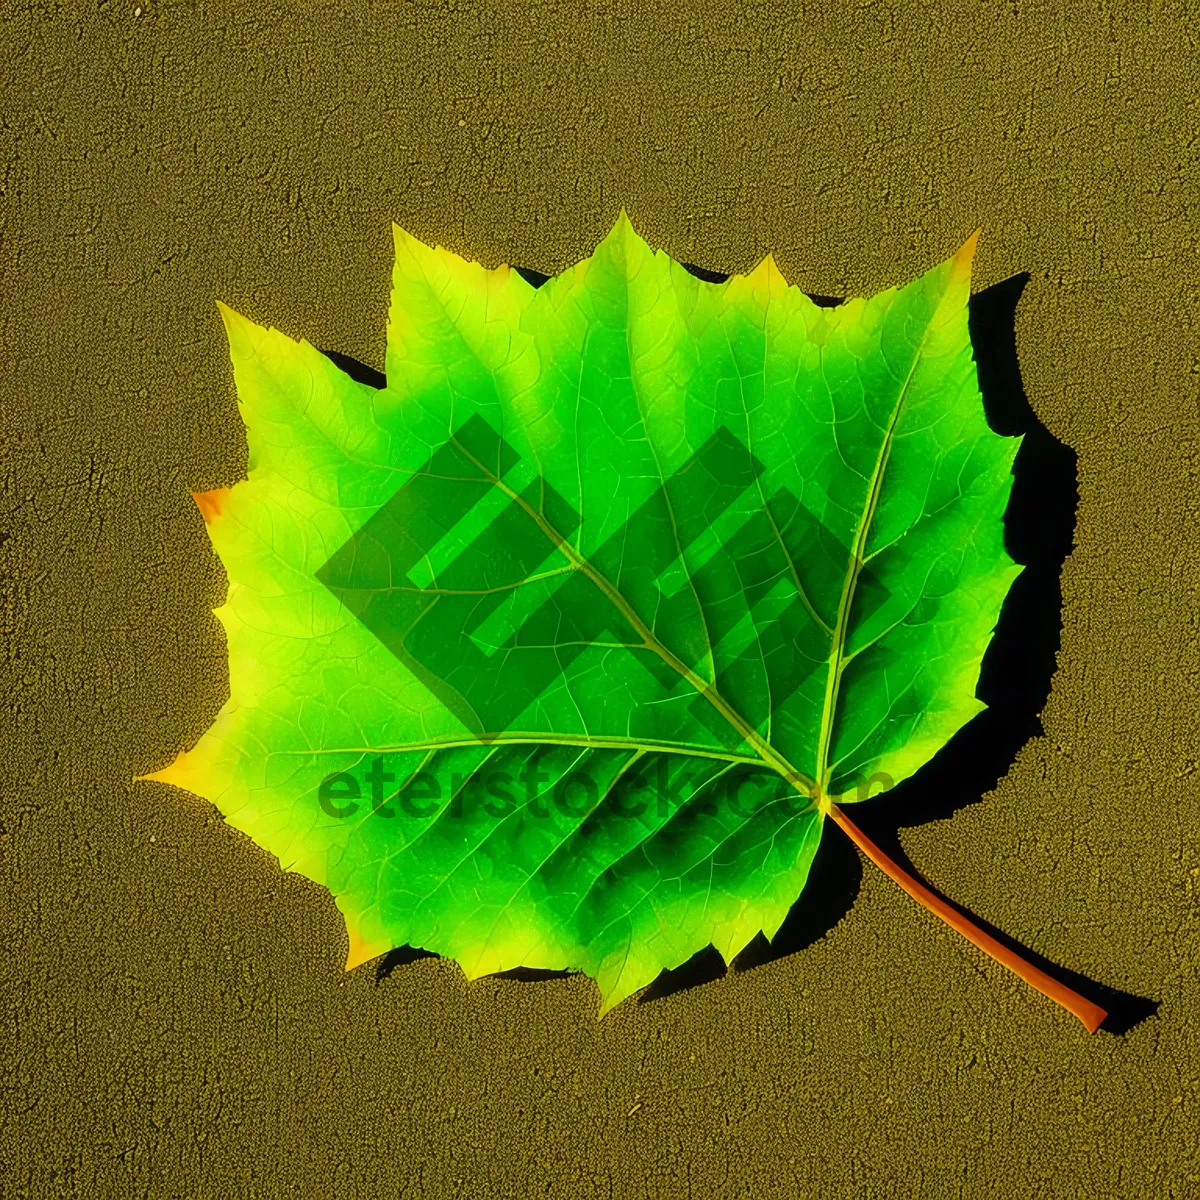 Picture of Vibrant Maple Leaf Design: Colorful, Bright, and Graphic